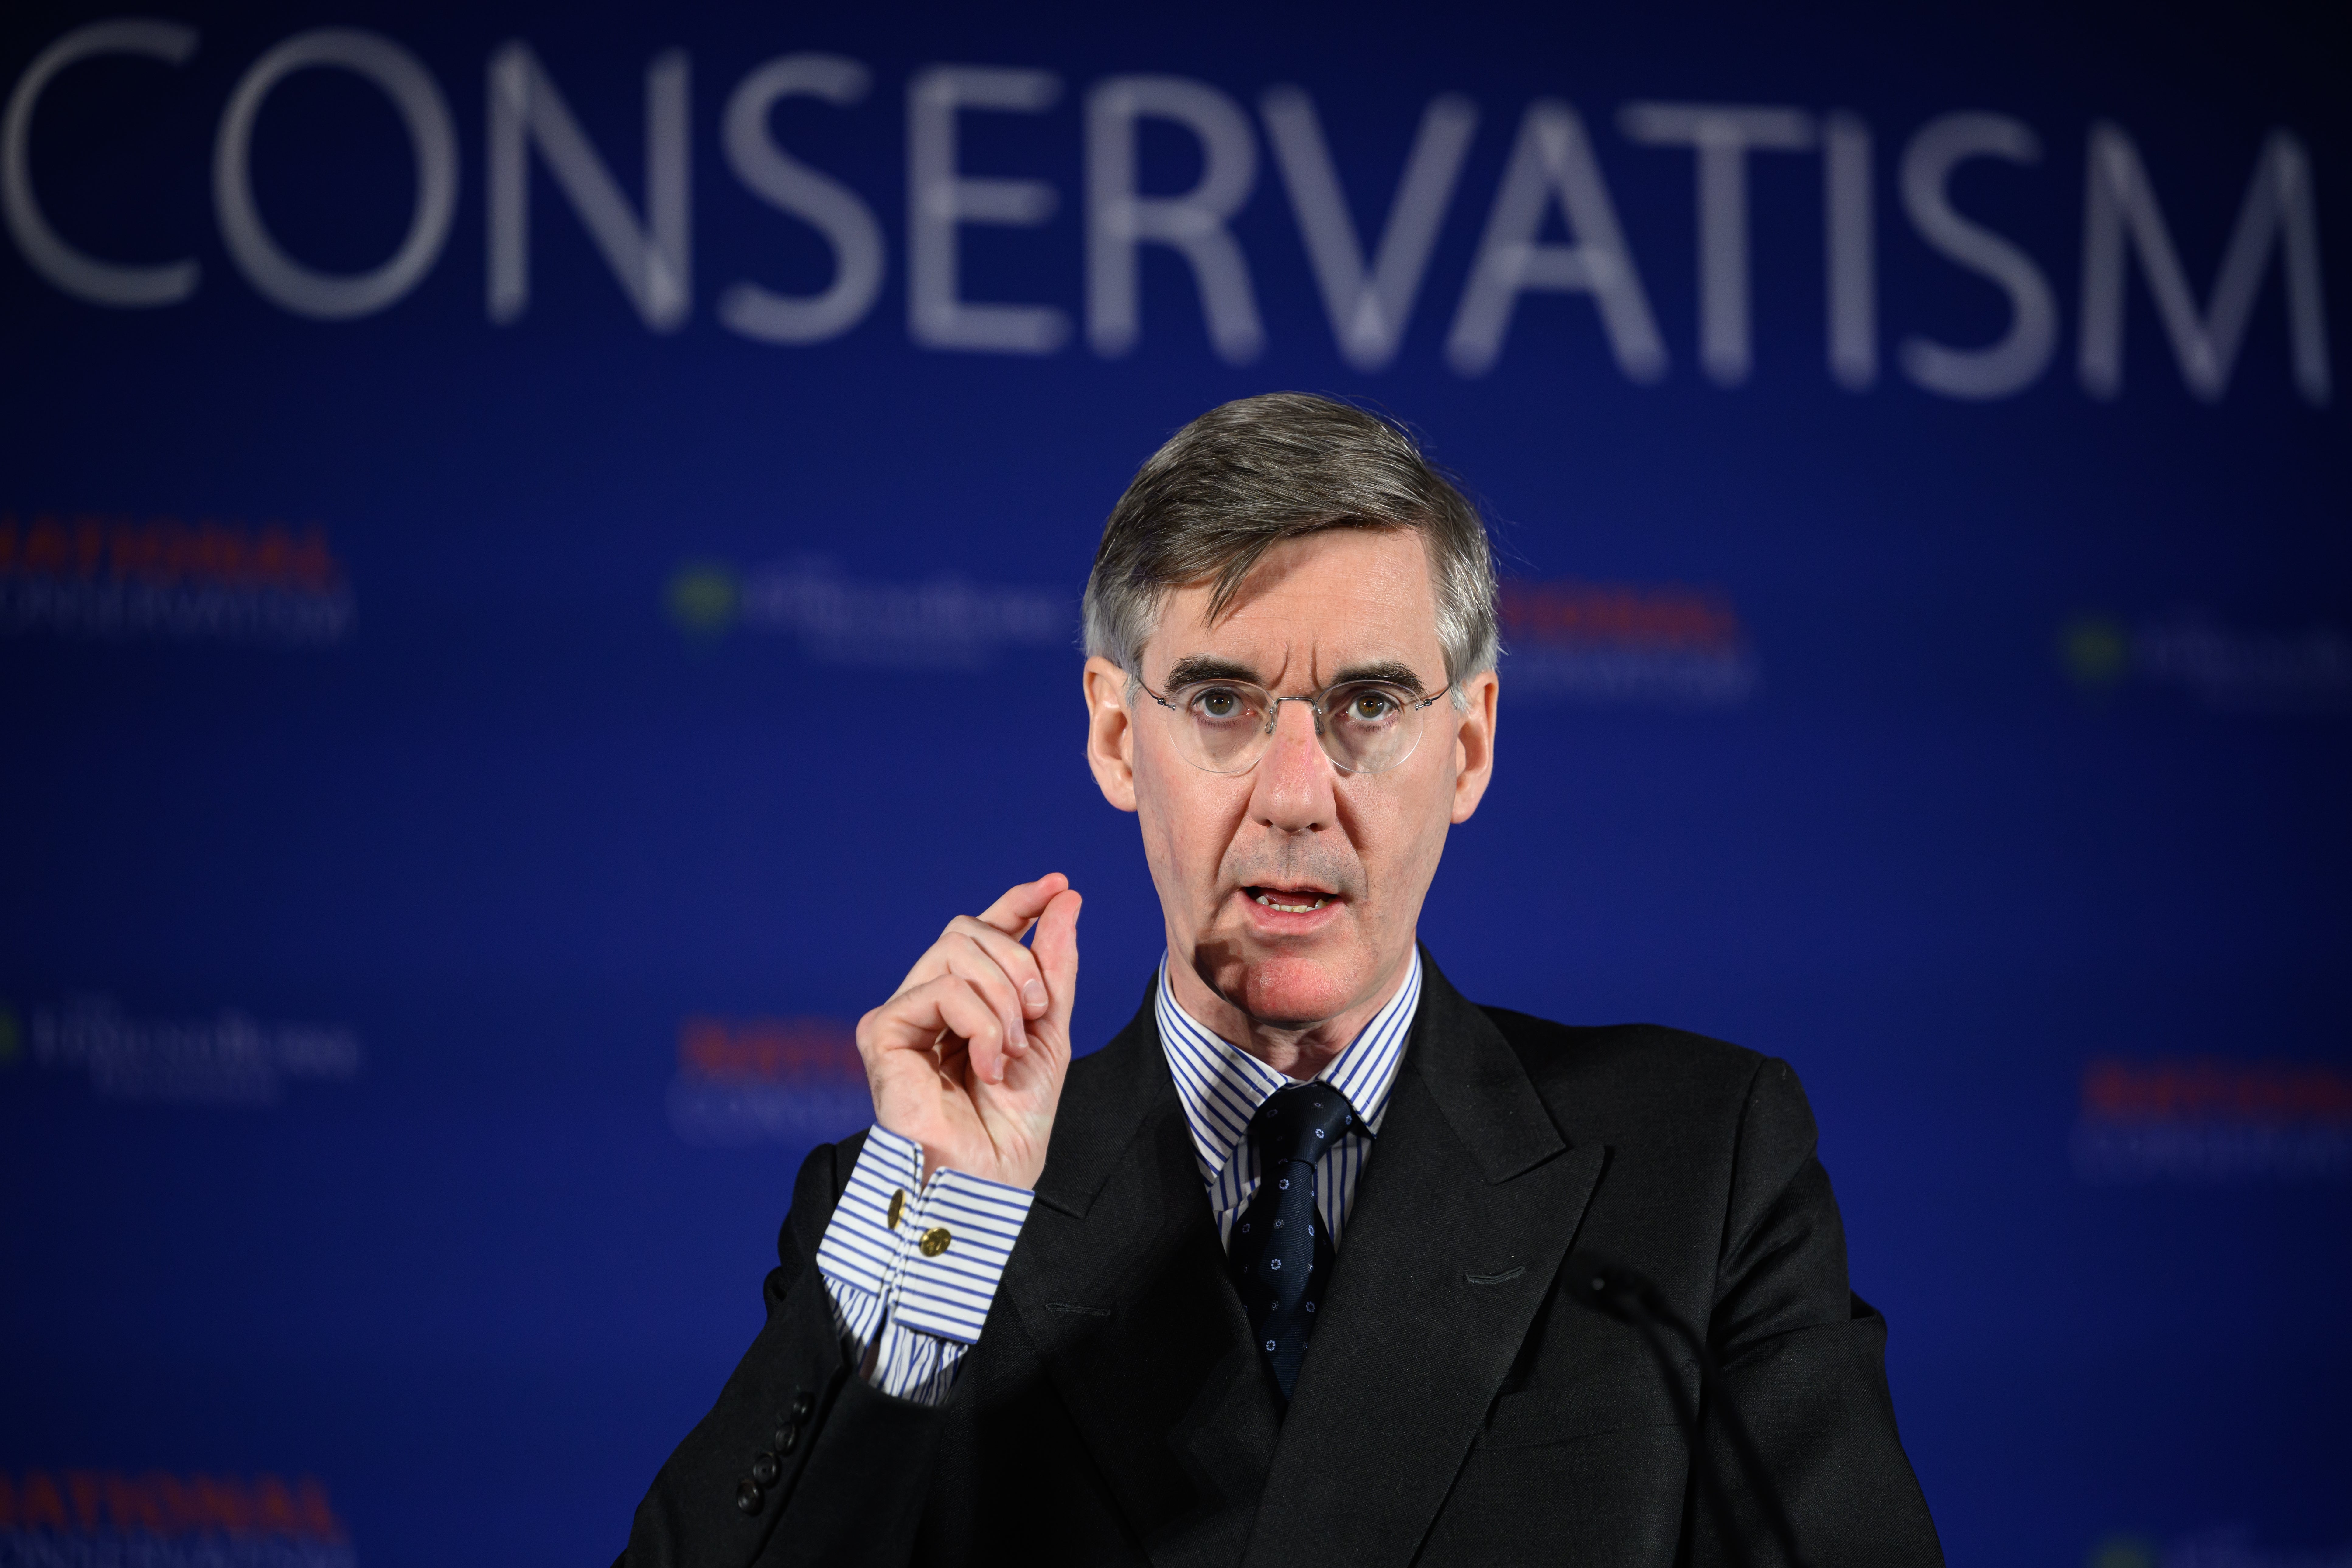 The rules were drawn up under Jacob Rees-Mogg